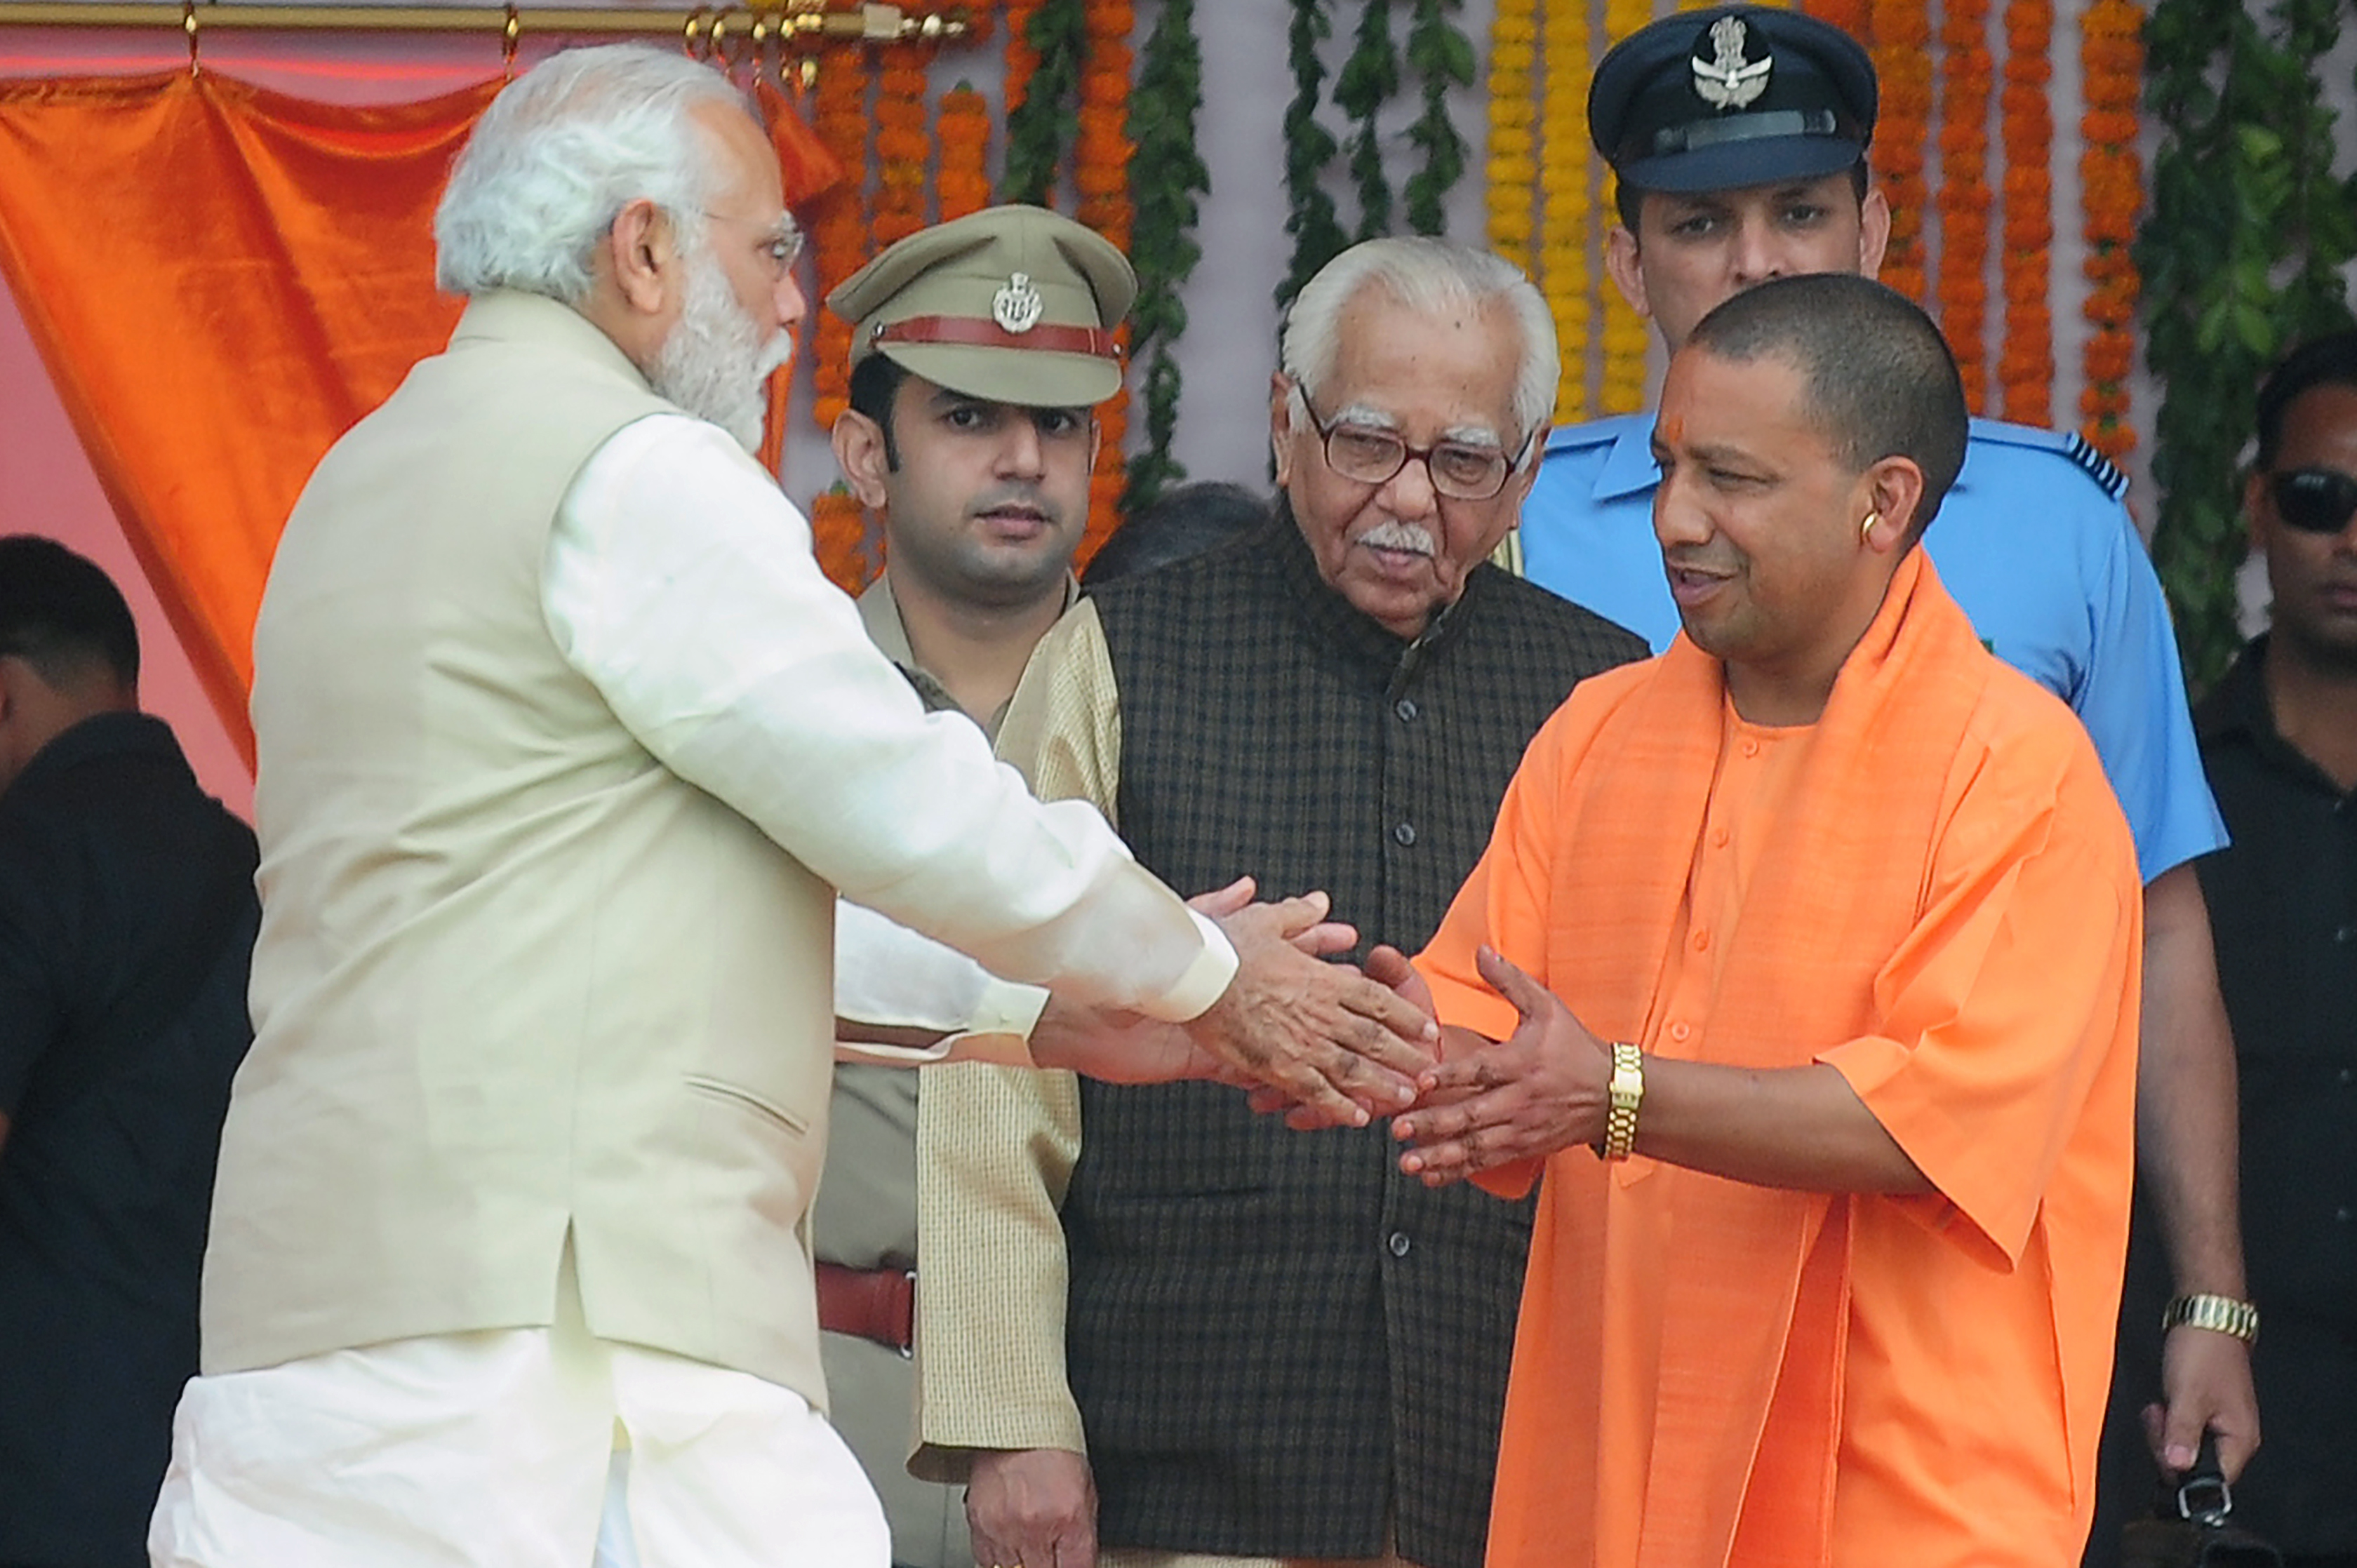 Indian Prime Minister Narendra Modi, left, greets Yogi Adityanath, chief minister of Uttar Pradesh state, at his swearing-in ceremony in Lucknow, India, on March 19, 2017 (Sanjay Kanojia—AFP/Getty Images)